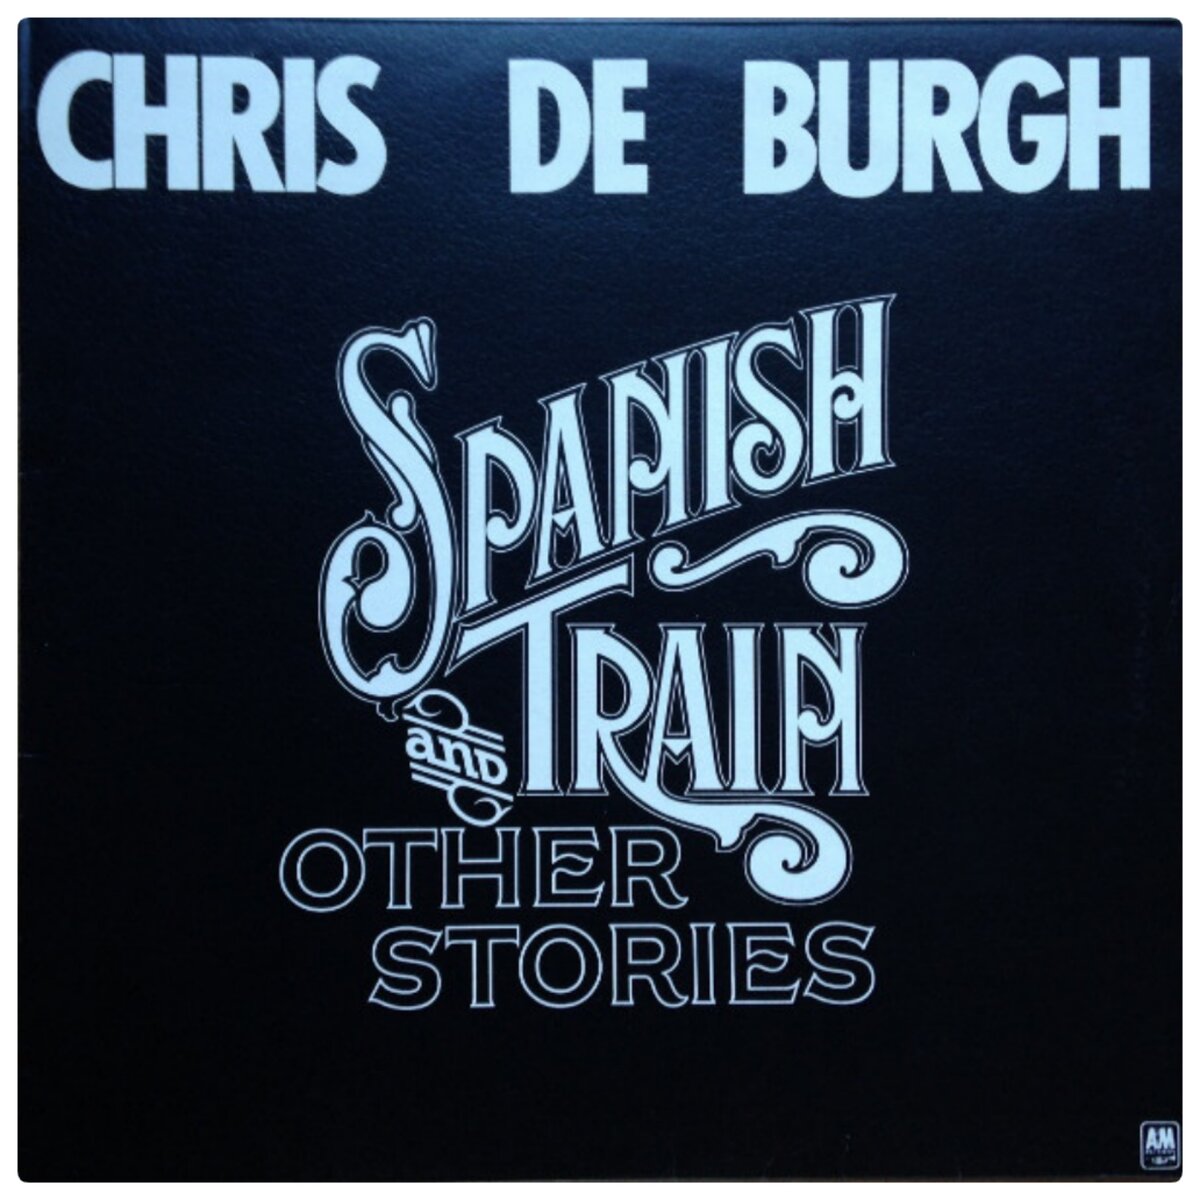 Chris de Burgh 1975 Spanish Train and other stories. Chris de Burgh this way up. Chris de Burgh альбомы сборники. Chris de Burgh 2004 - the Road to Freedom. Forgotten songs